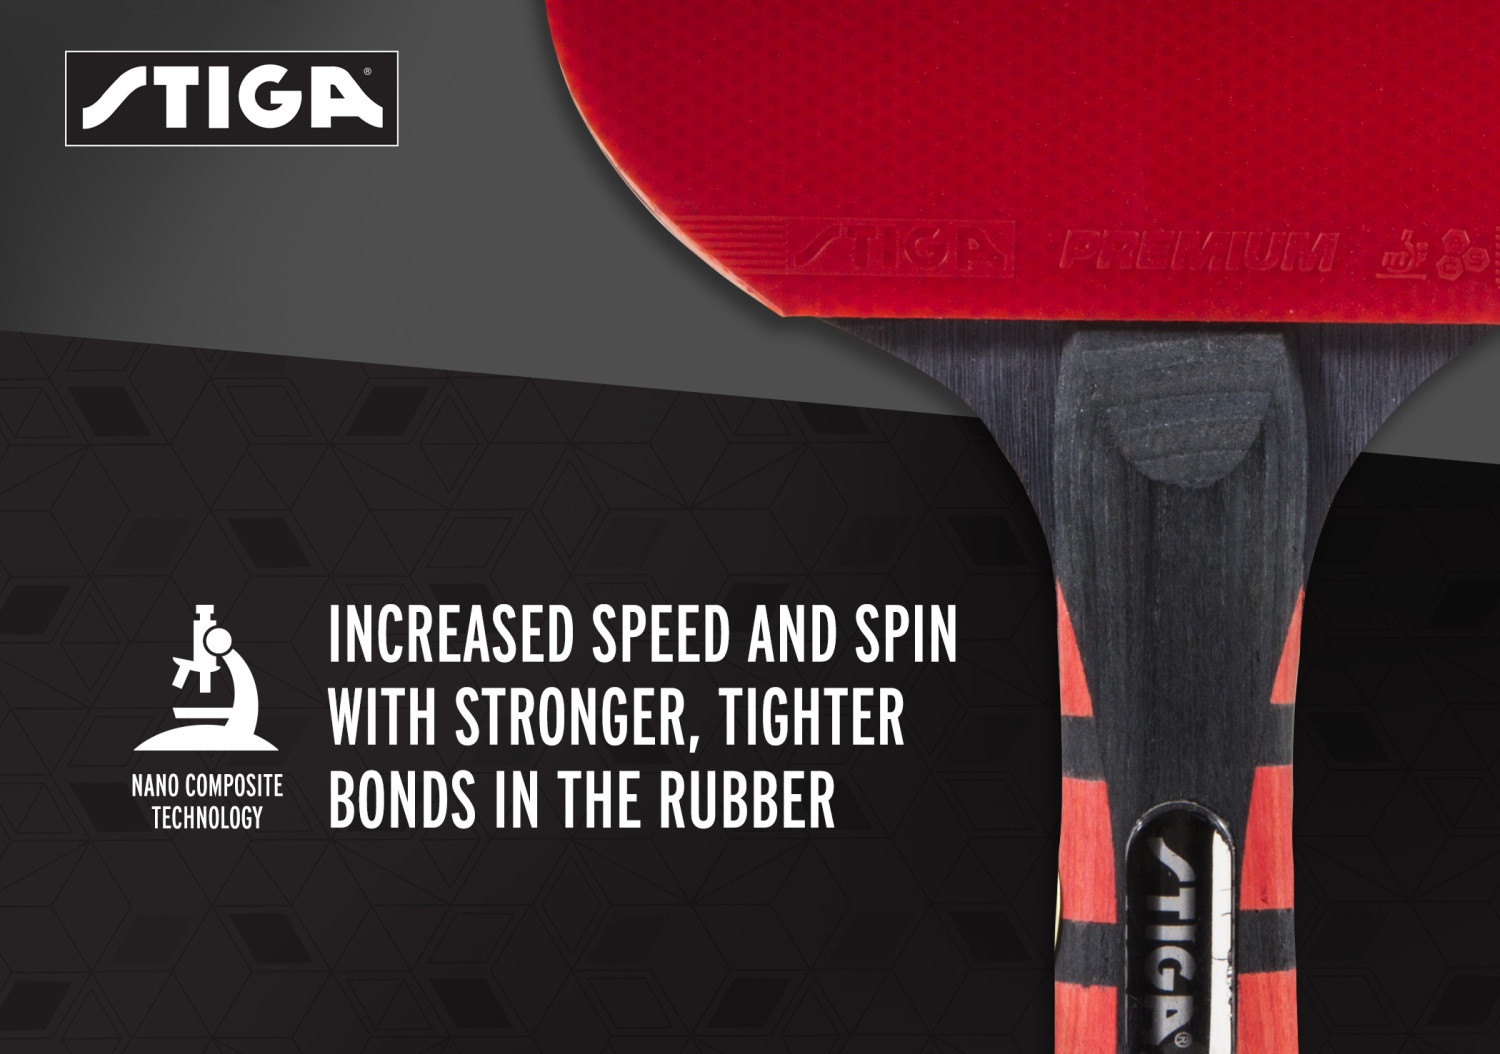 STIGA Evolution Performance-Level Table Tennis Racket Made with Approved Rubber for Tournament Play - image 5 of 15